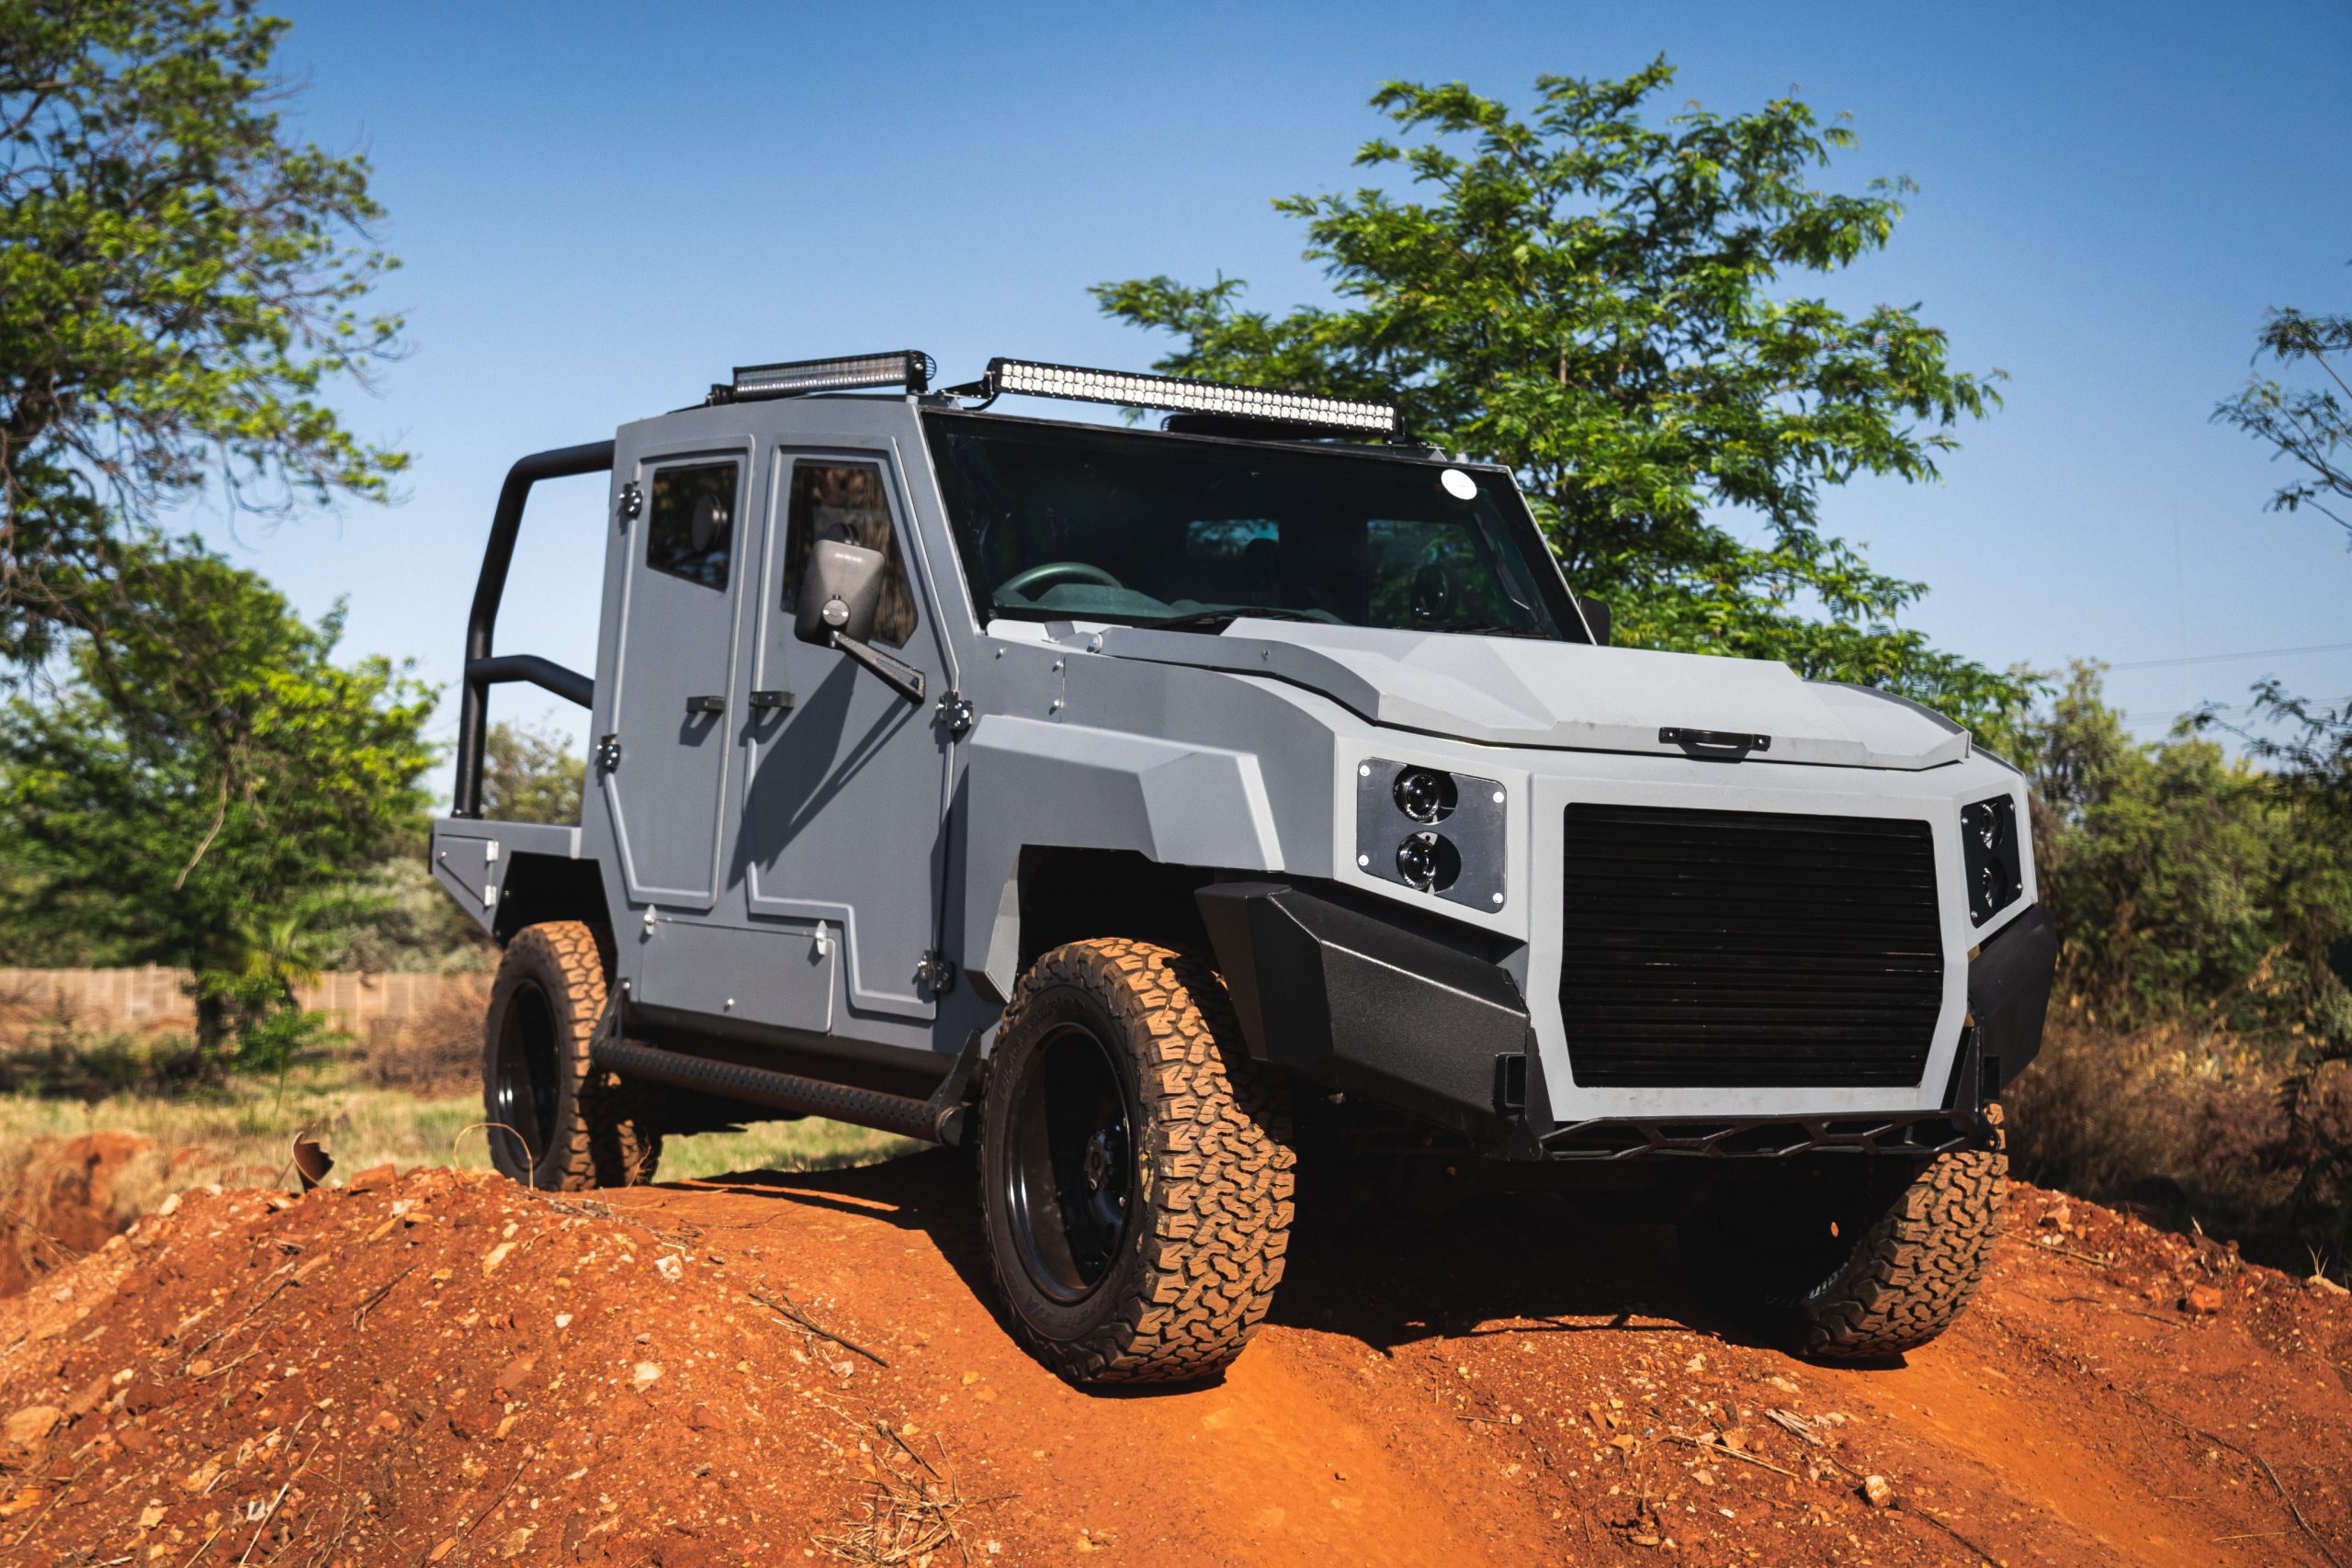 Check out this SA built armoured bakkie